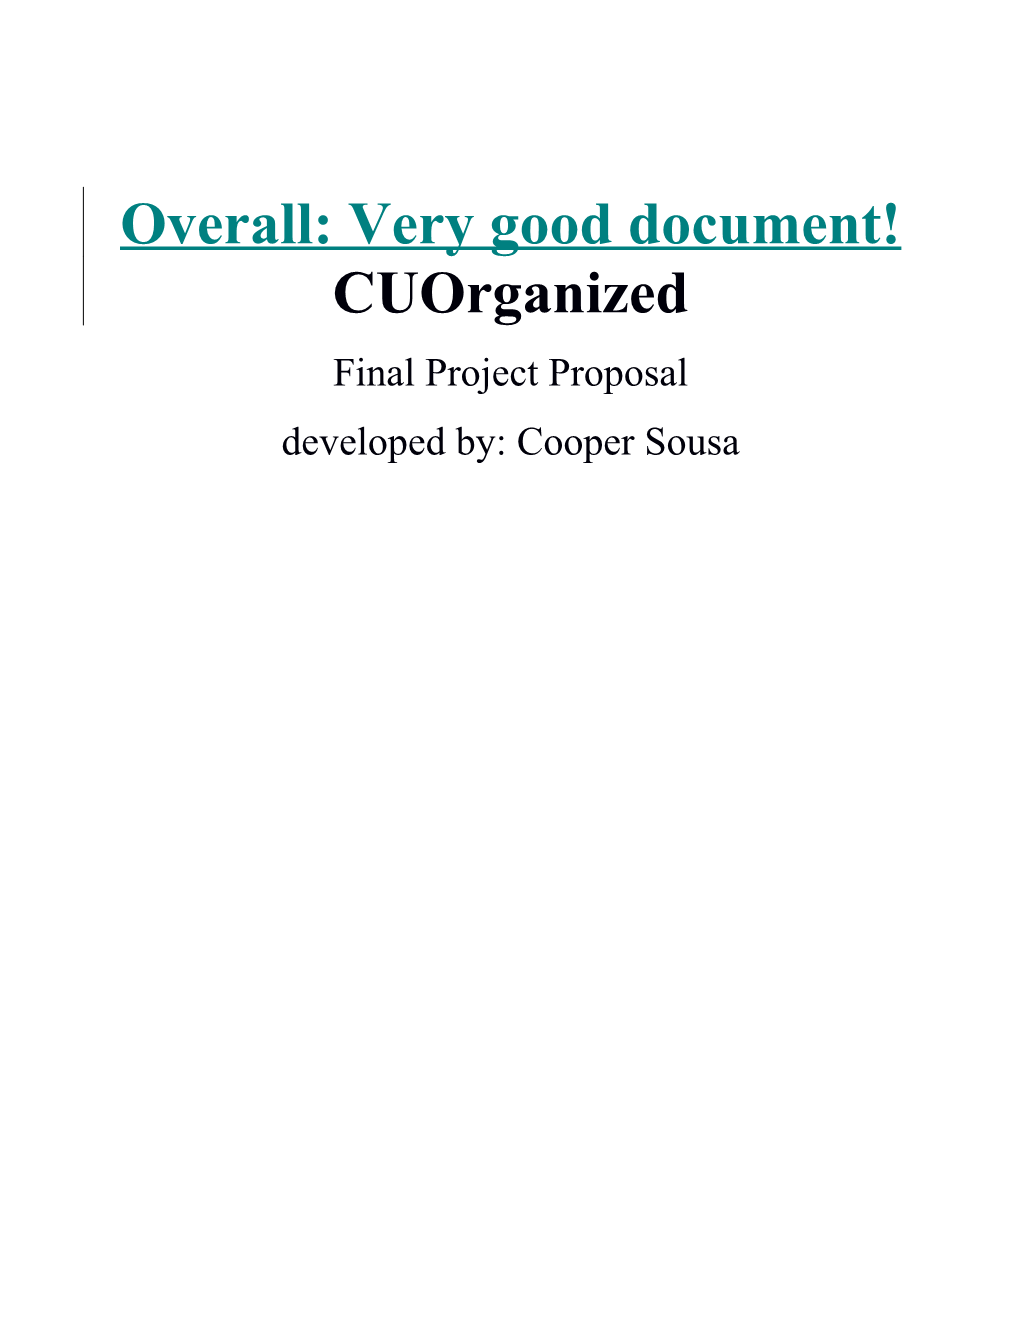 Overall: Very Good Document!